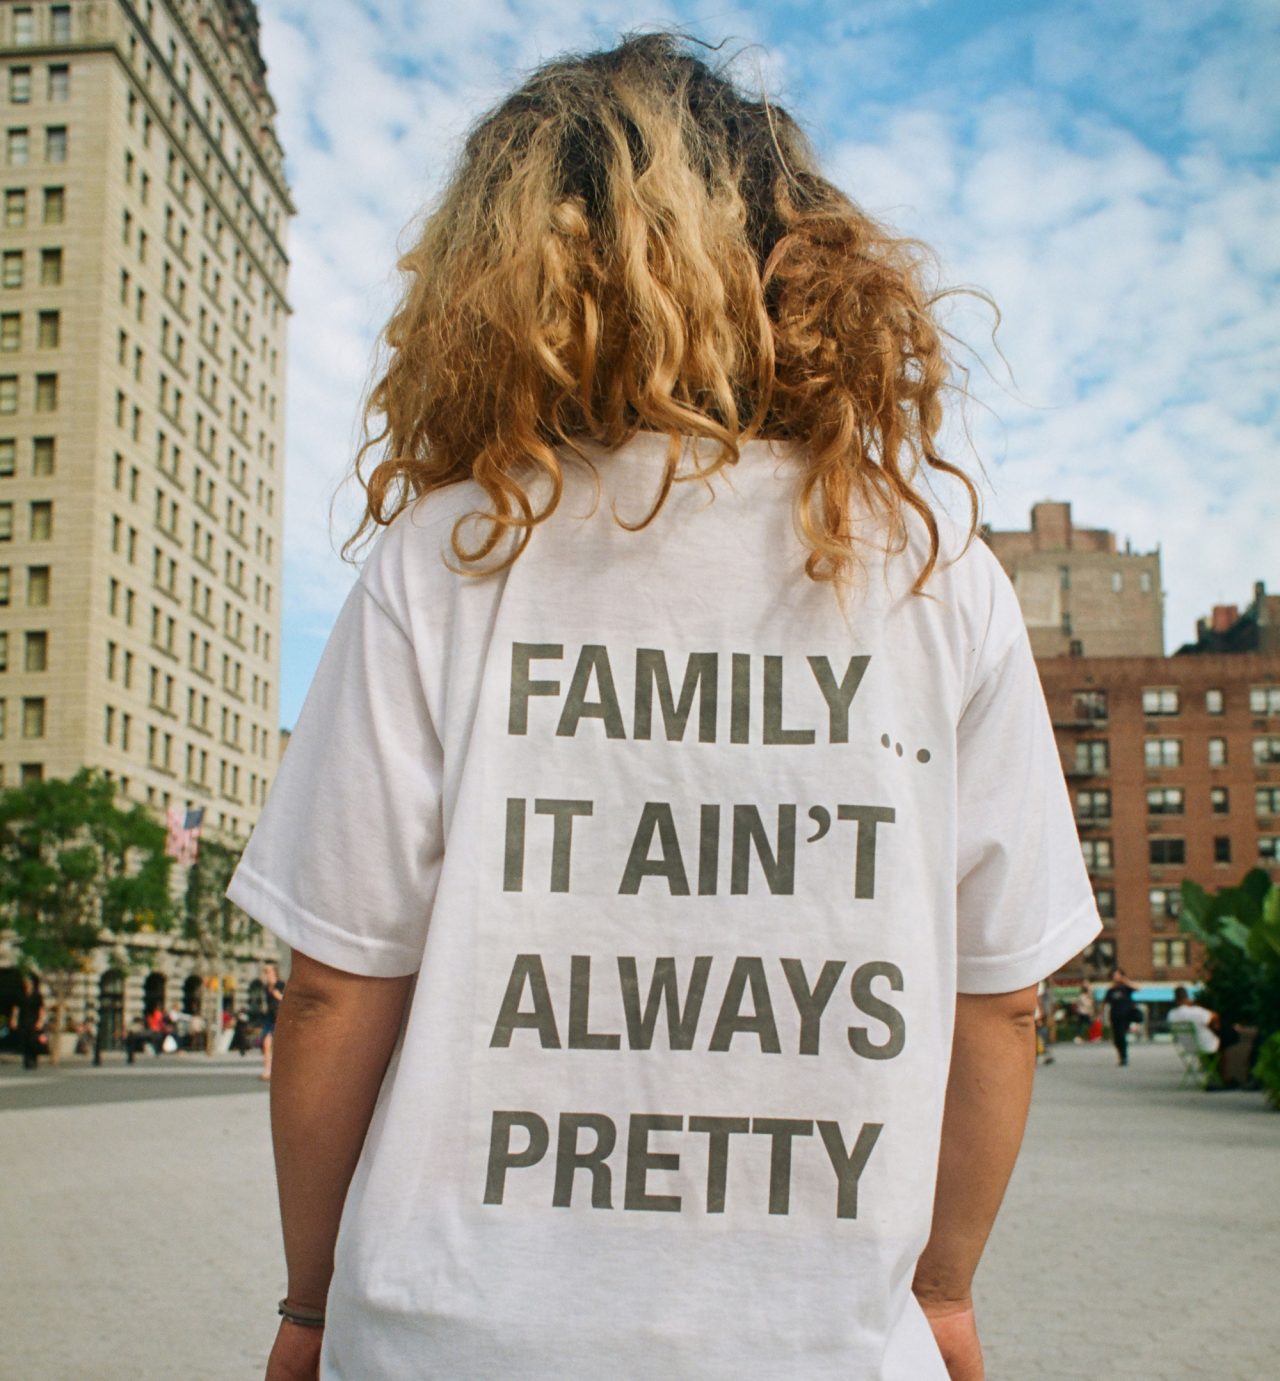 Photograph of T-shirt saying Family: it ain't always pretty